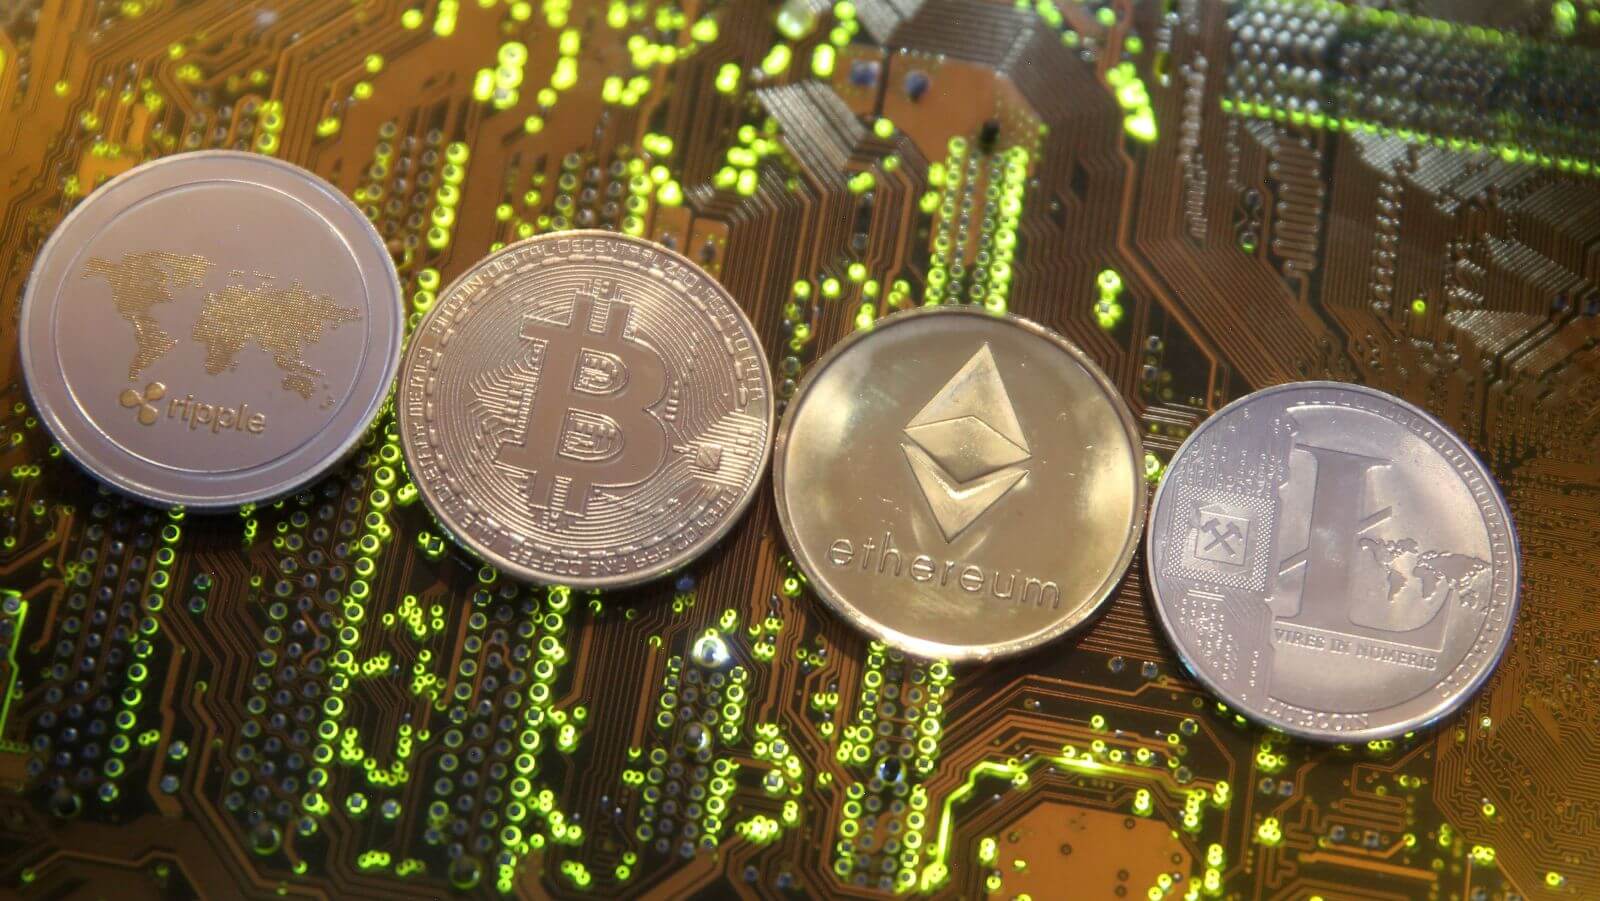 CipherTrace says $3.1 billion may have been stolen at cryptocurrency exchanges in 2019